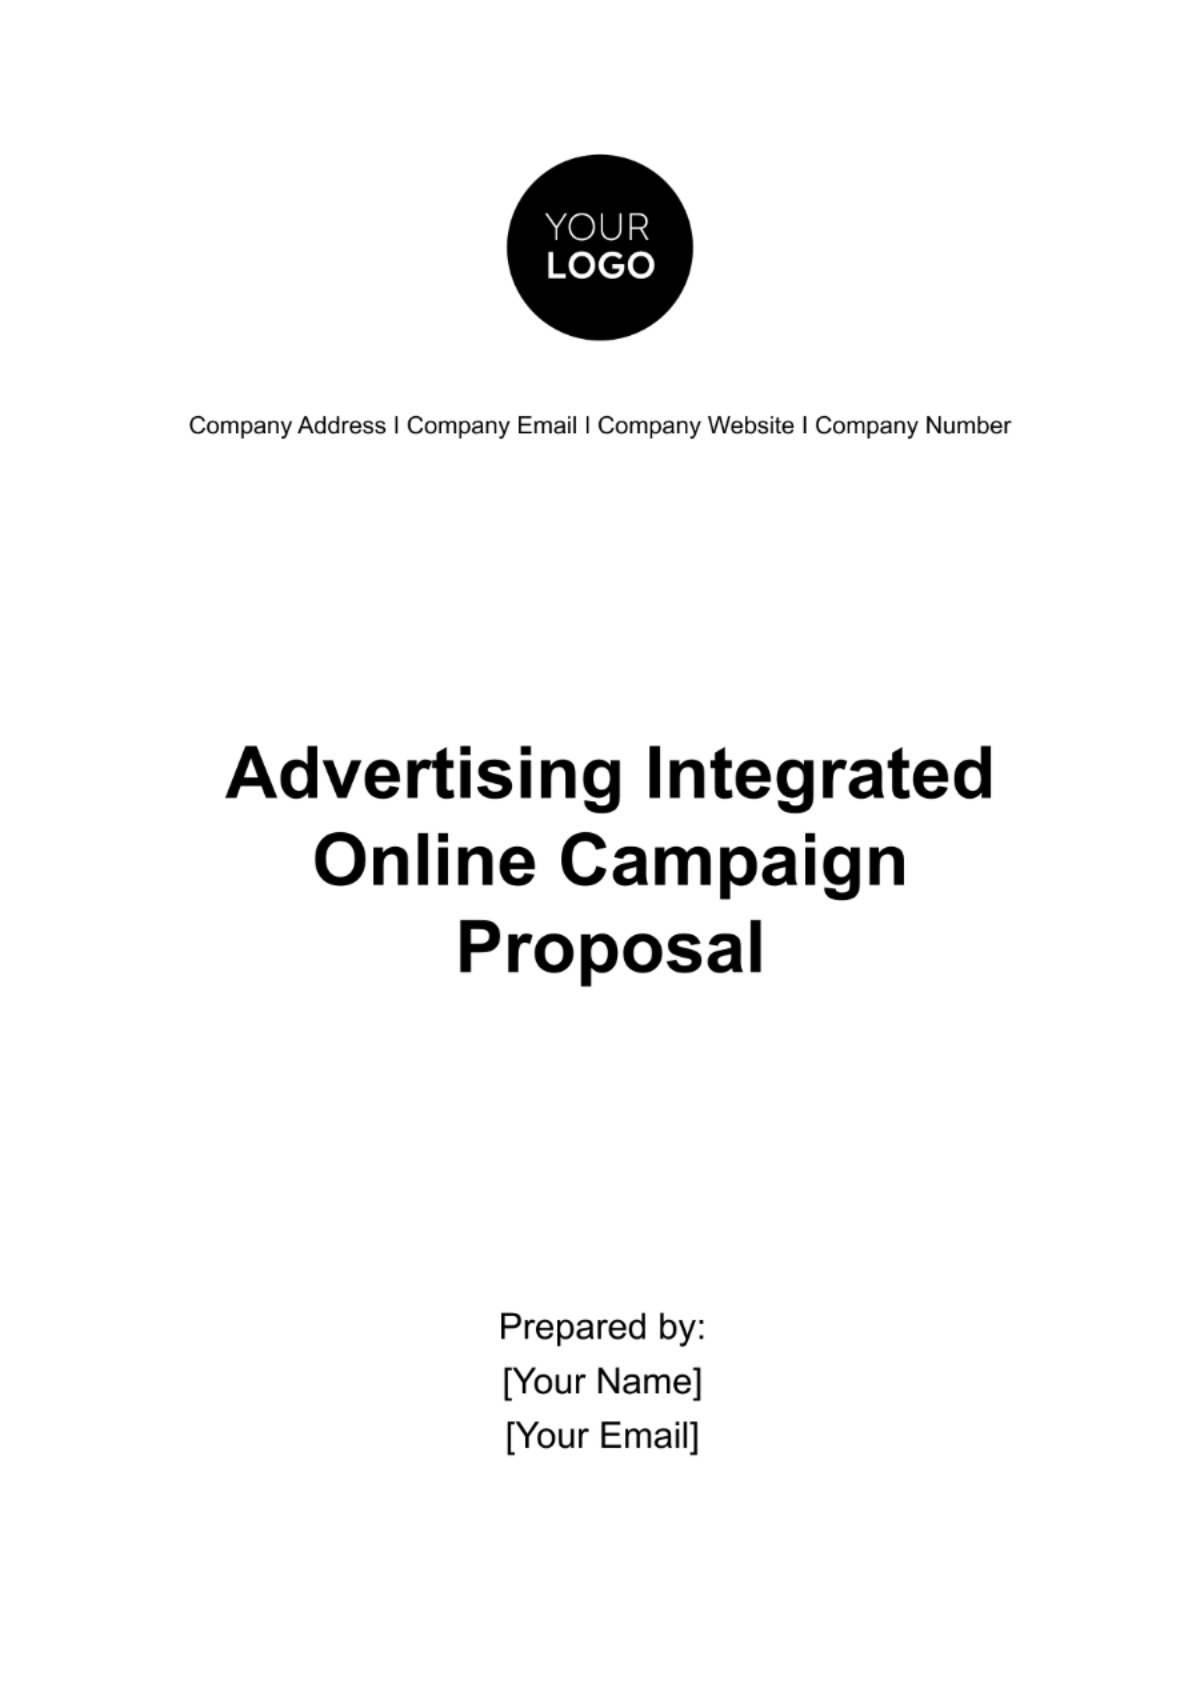 Advertising Integrated Online Campaign Proposal Template